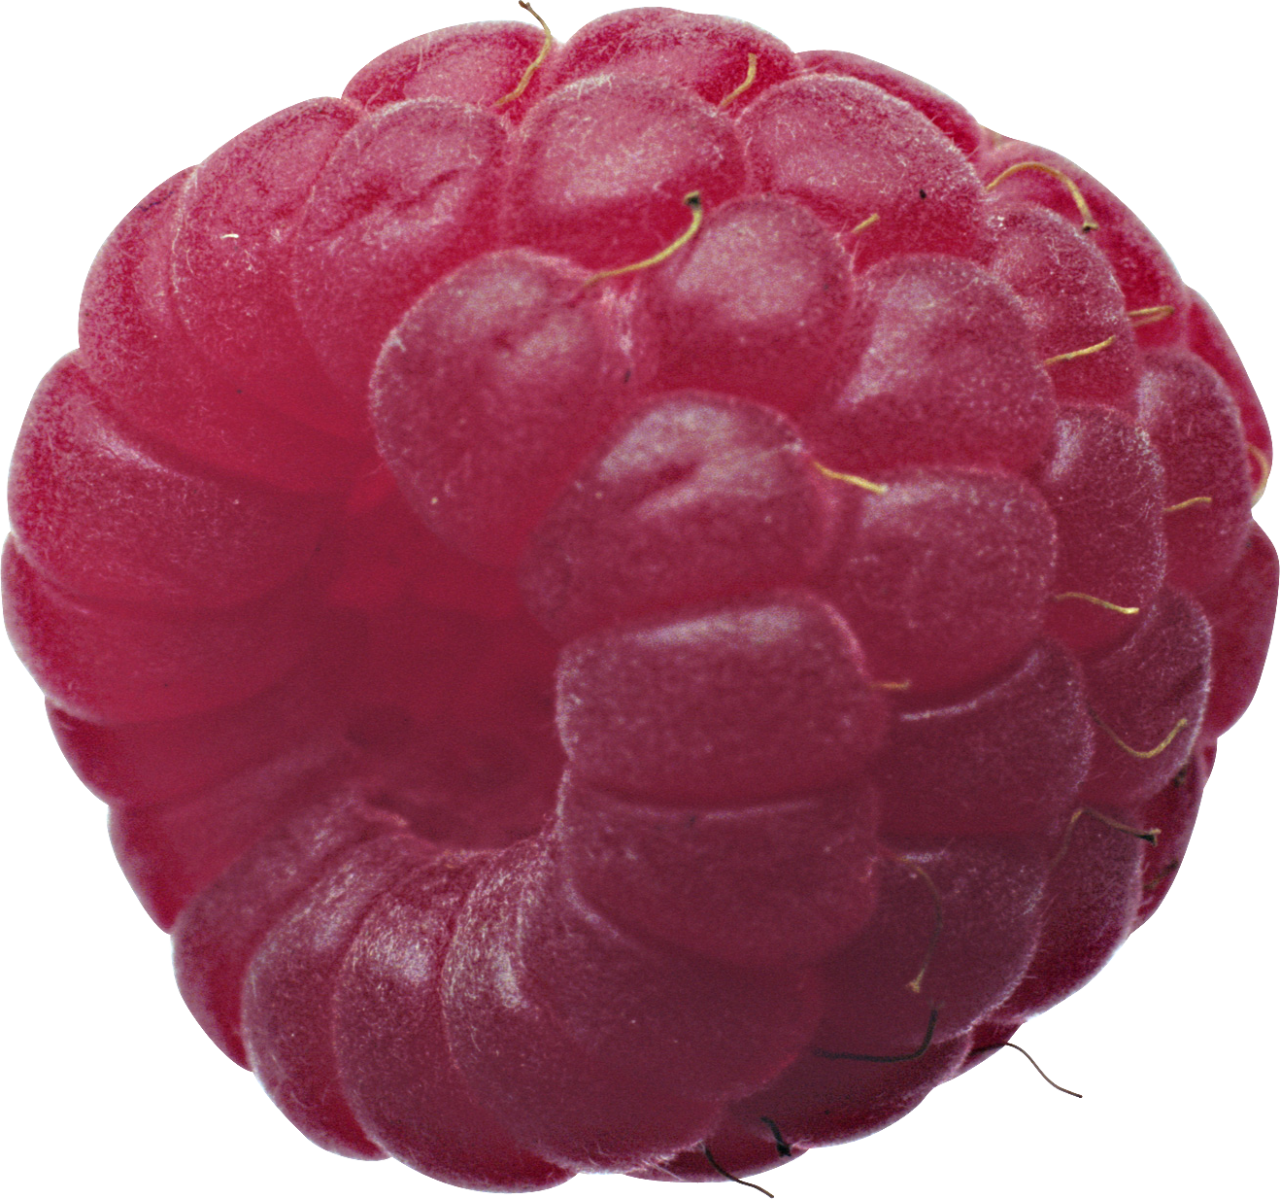 Raspberry Blue Fruit Png Picpng - vrogue.co